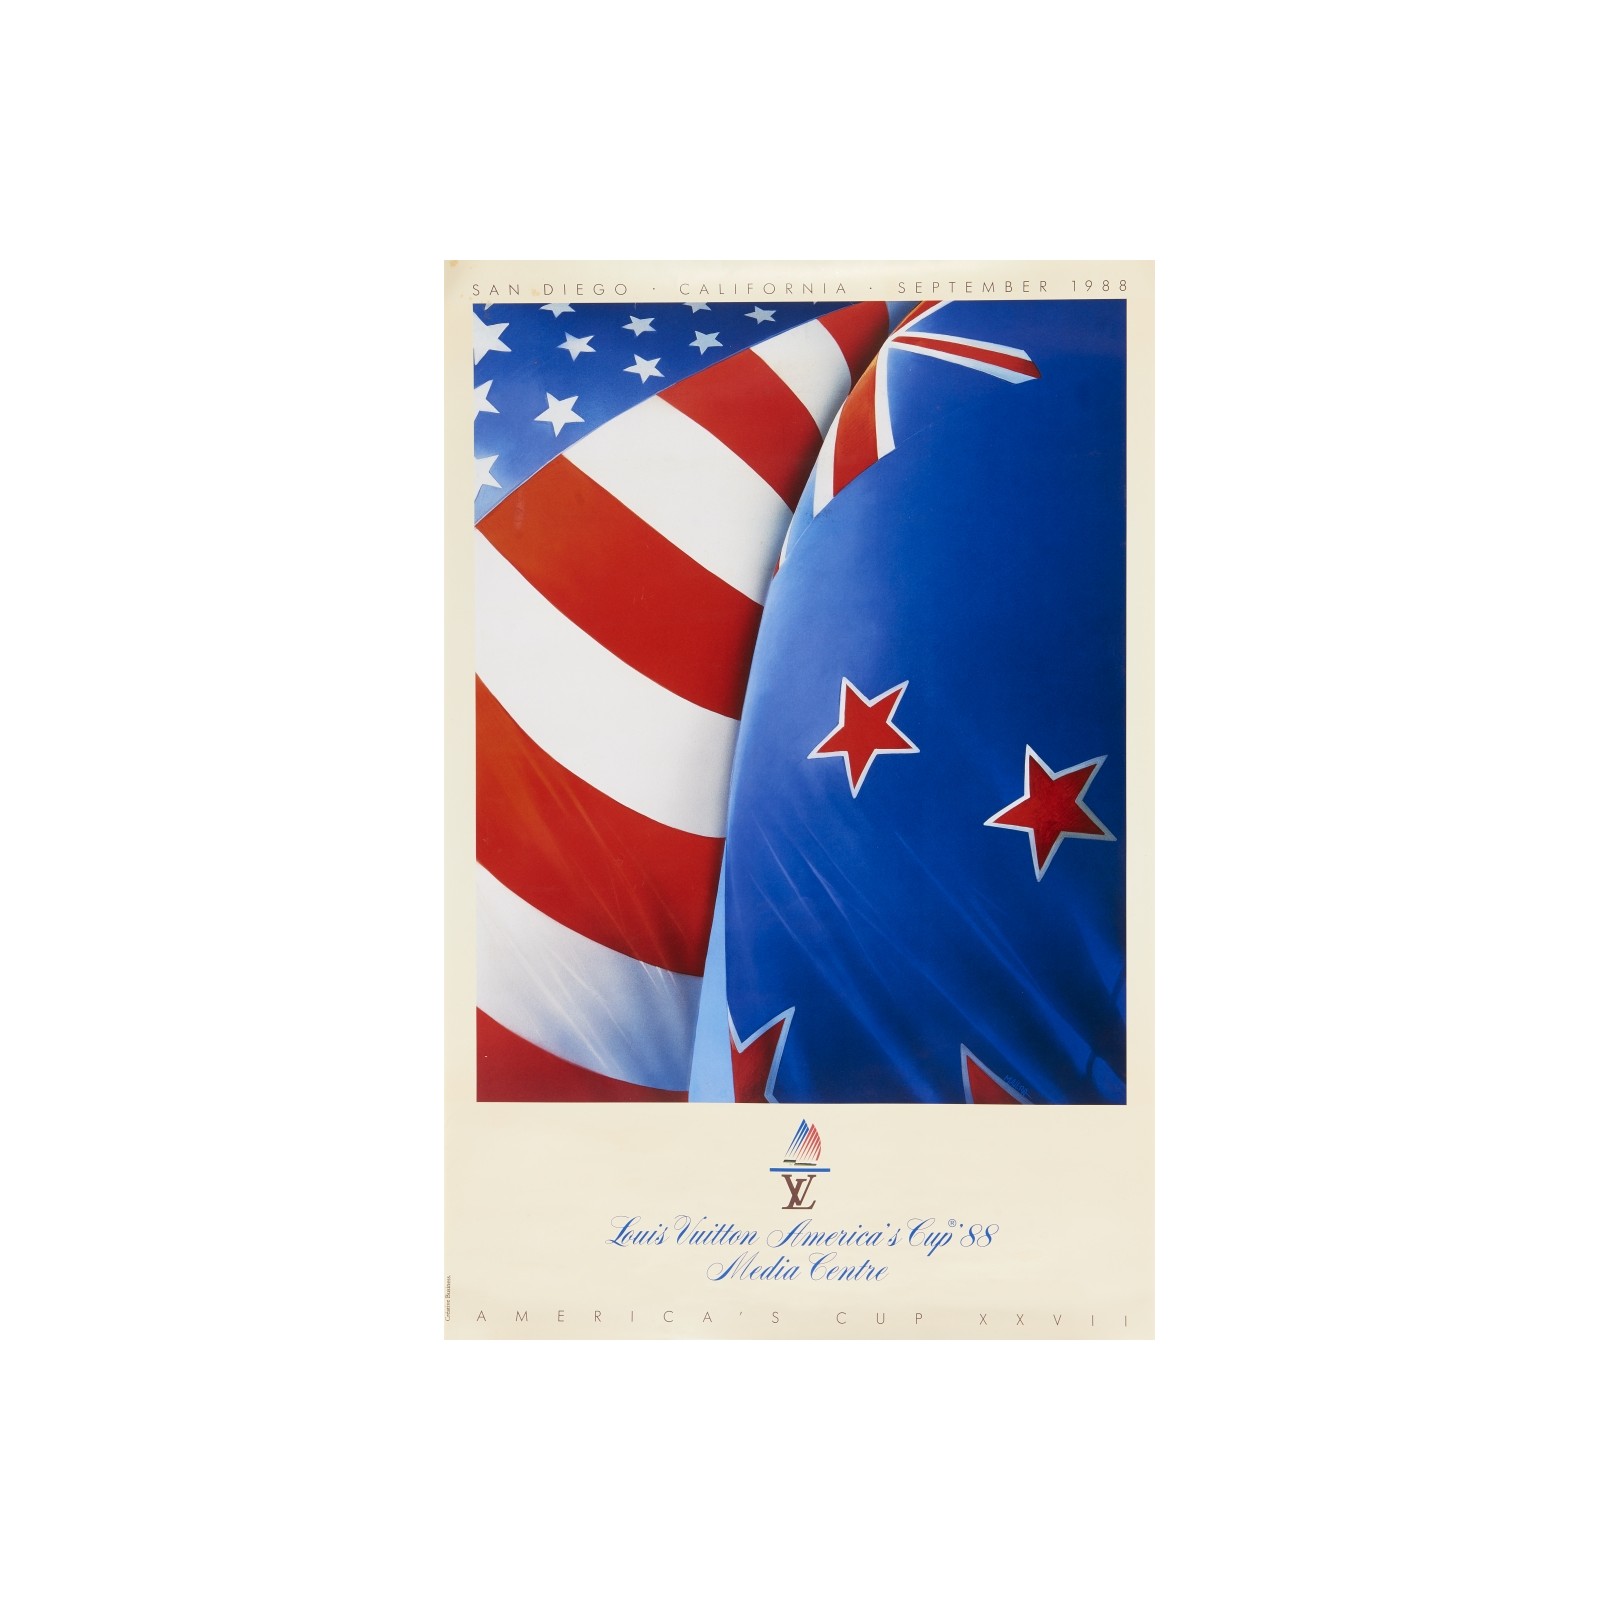 Louis Vuitton America&#39;s Cup 88. 1988. - Posters We Love